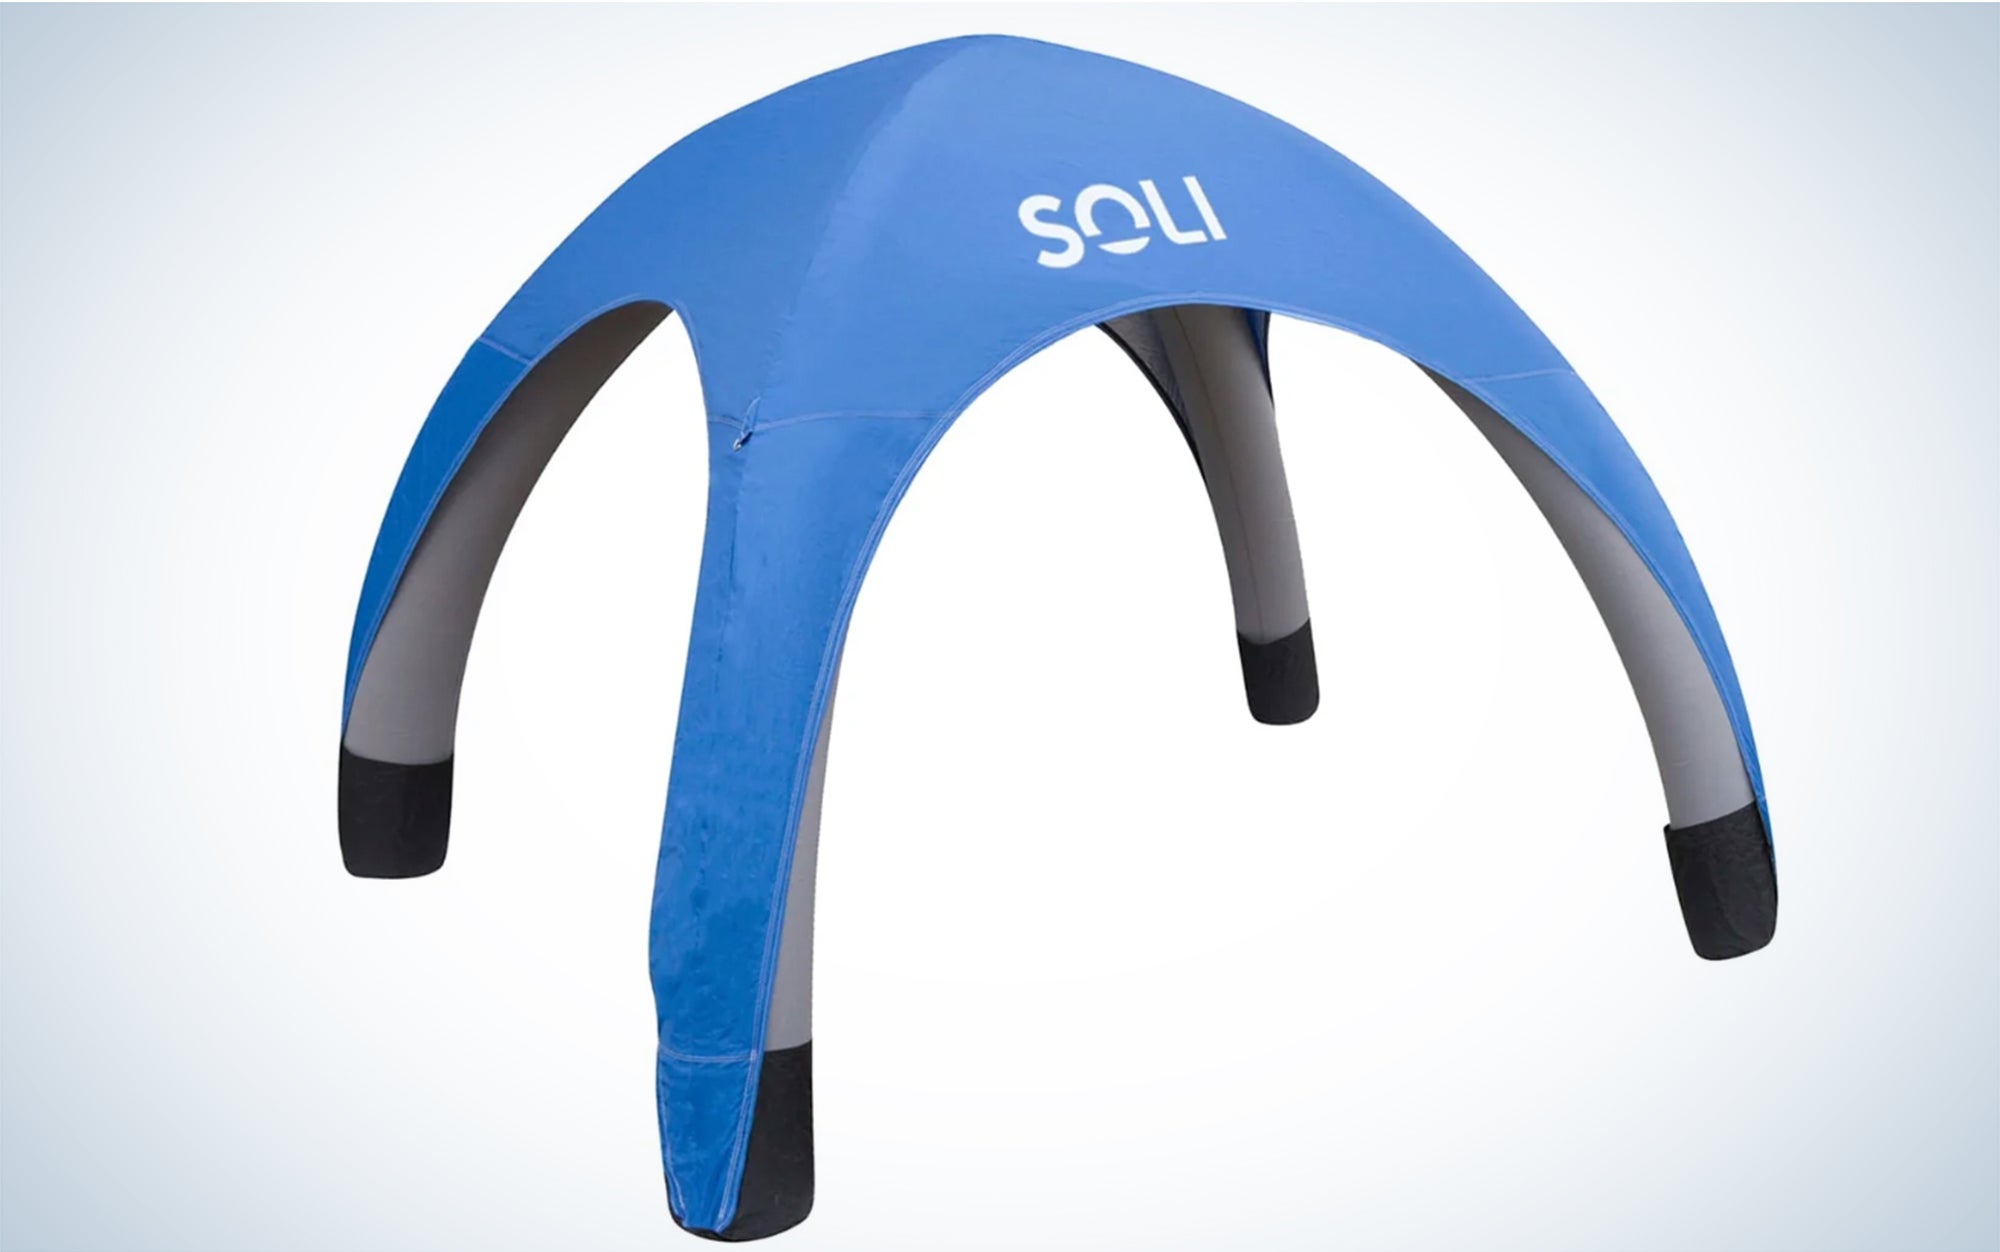 We tested the Soli Air Canopy.